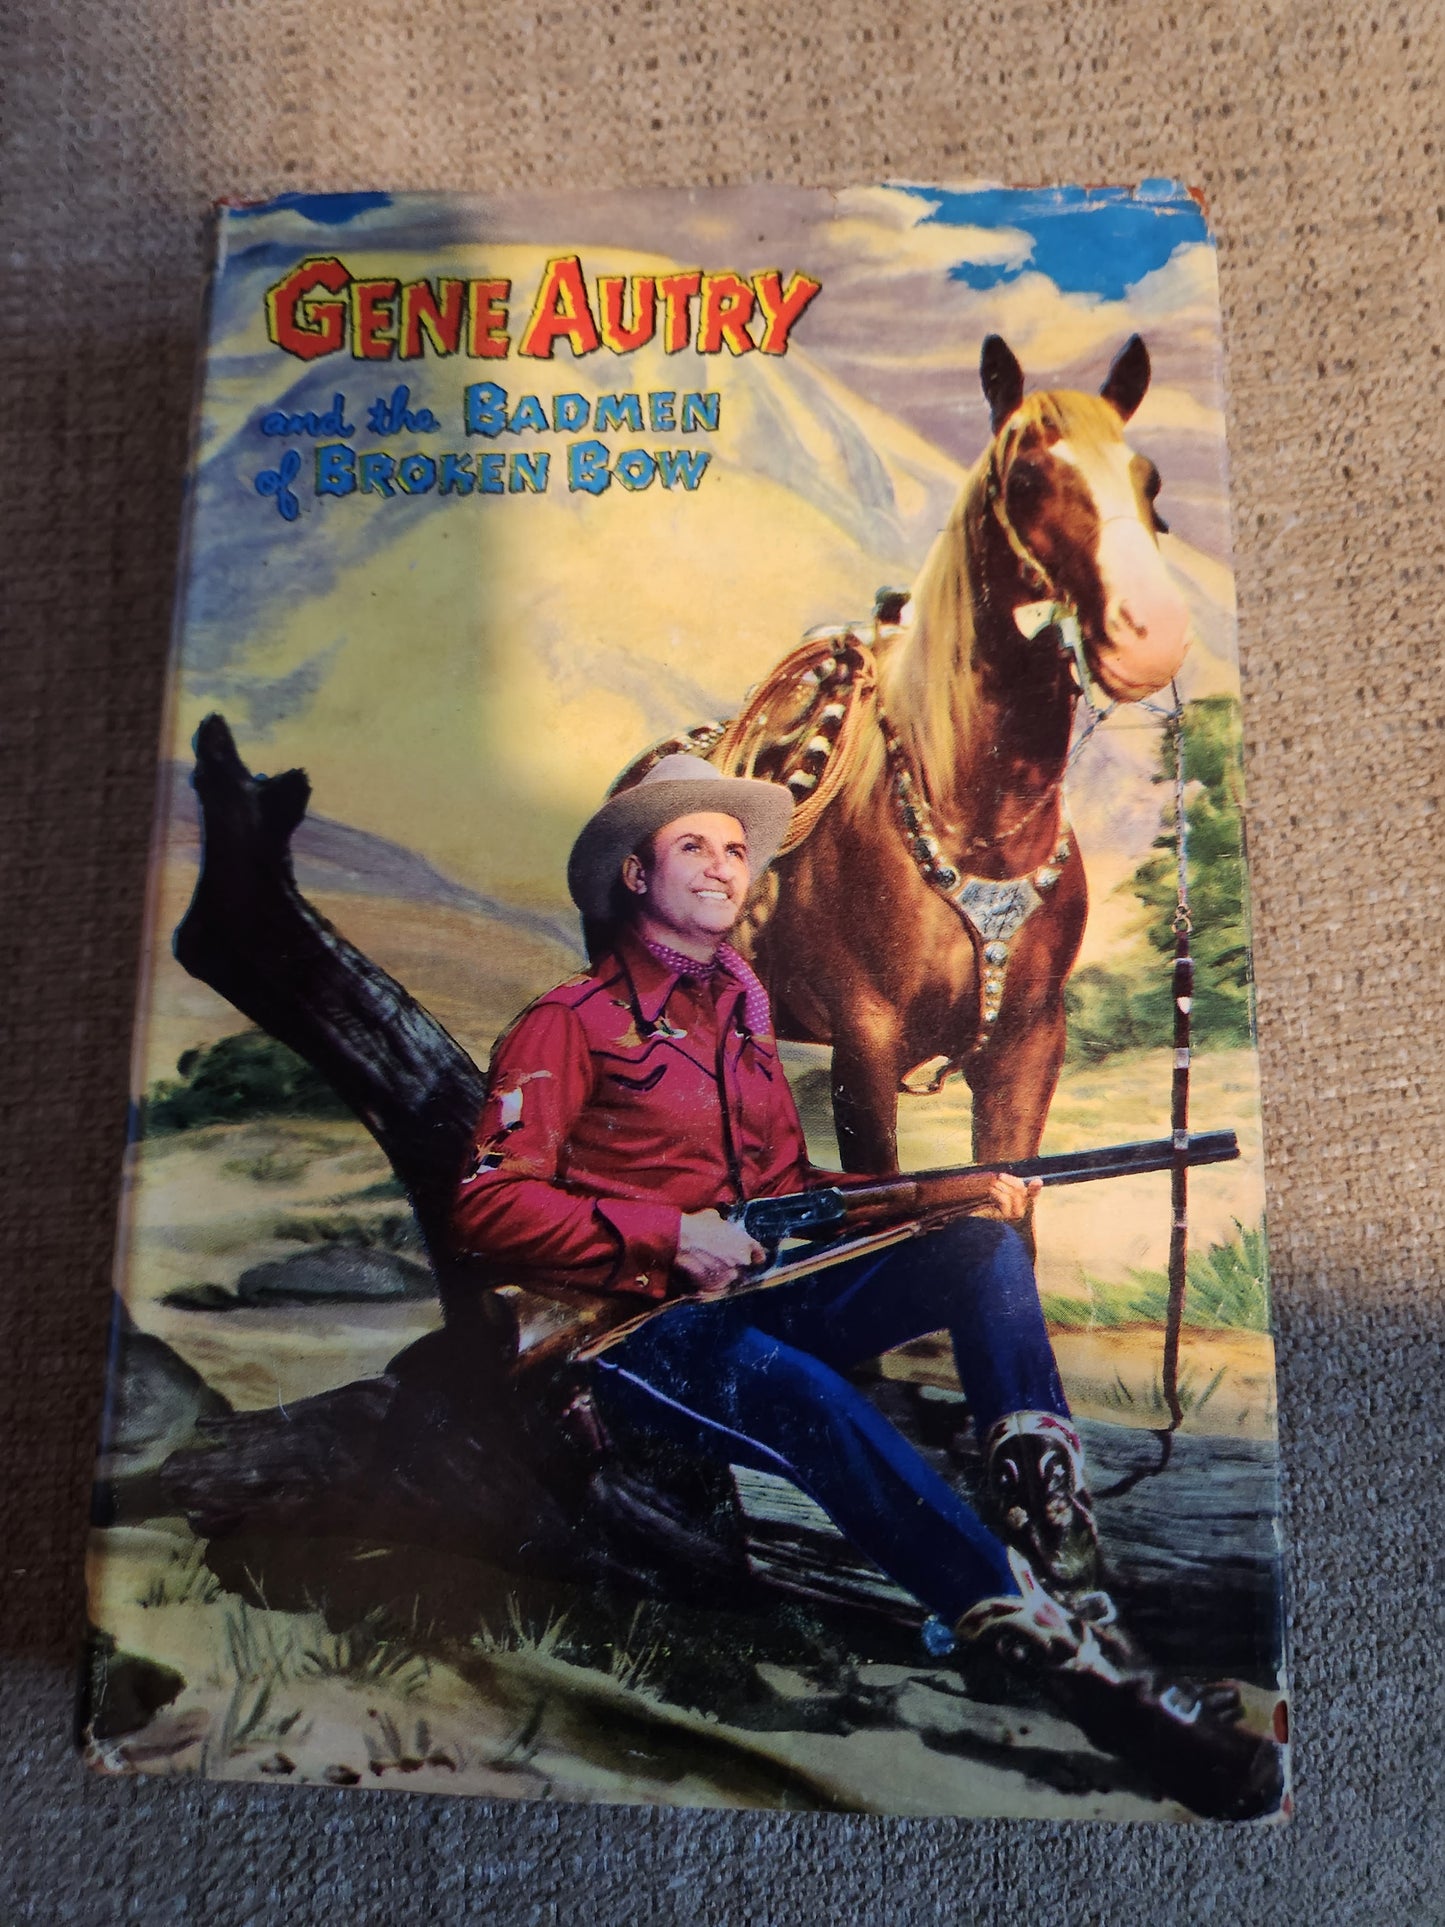 "Gene Autry and the Badmen of Broken Bow" by Snowden Miller, First Edition - Dead Tree Dreams Bookstore